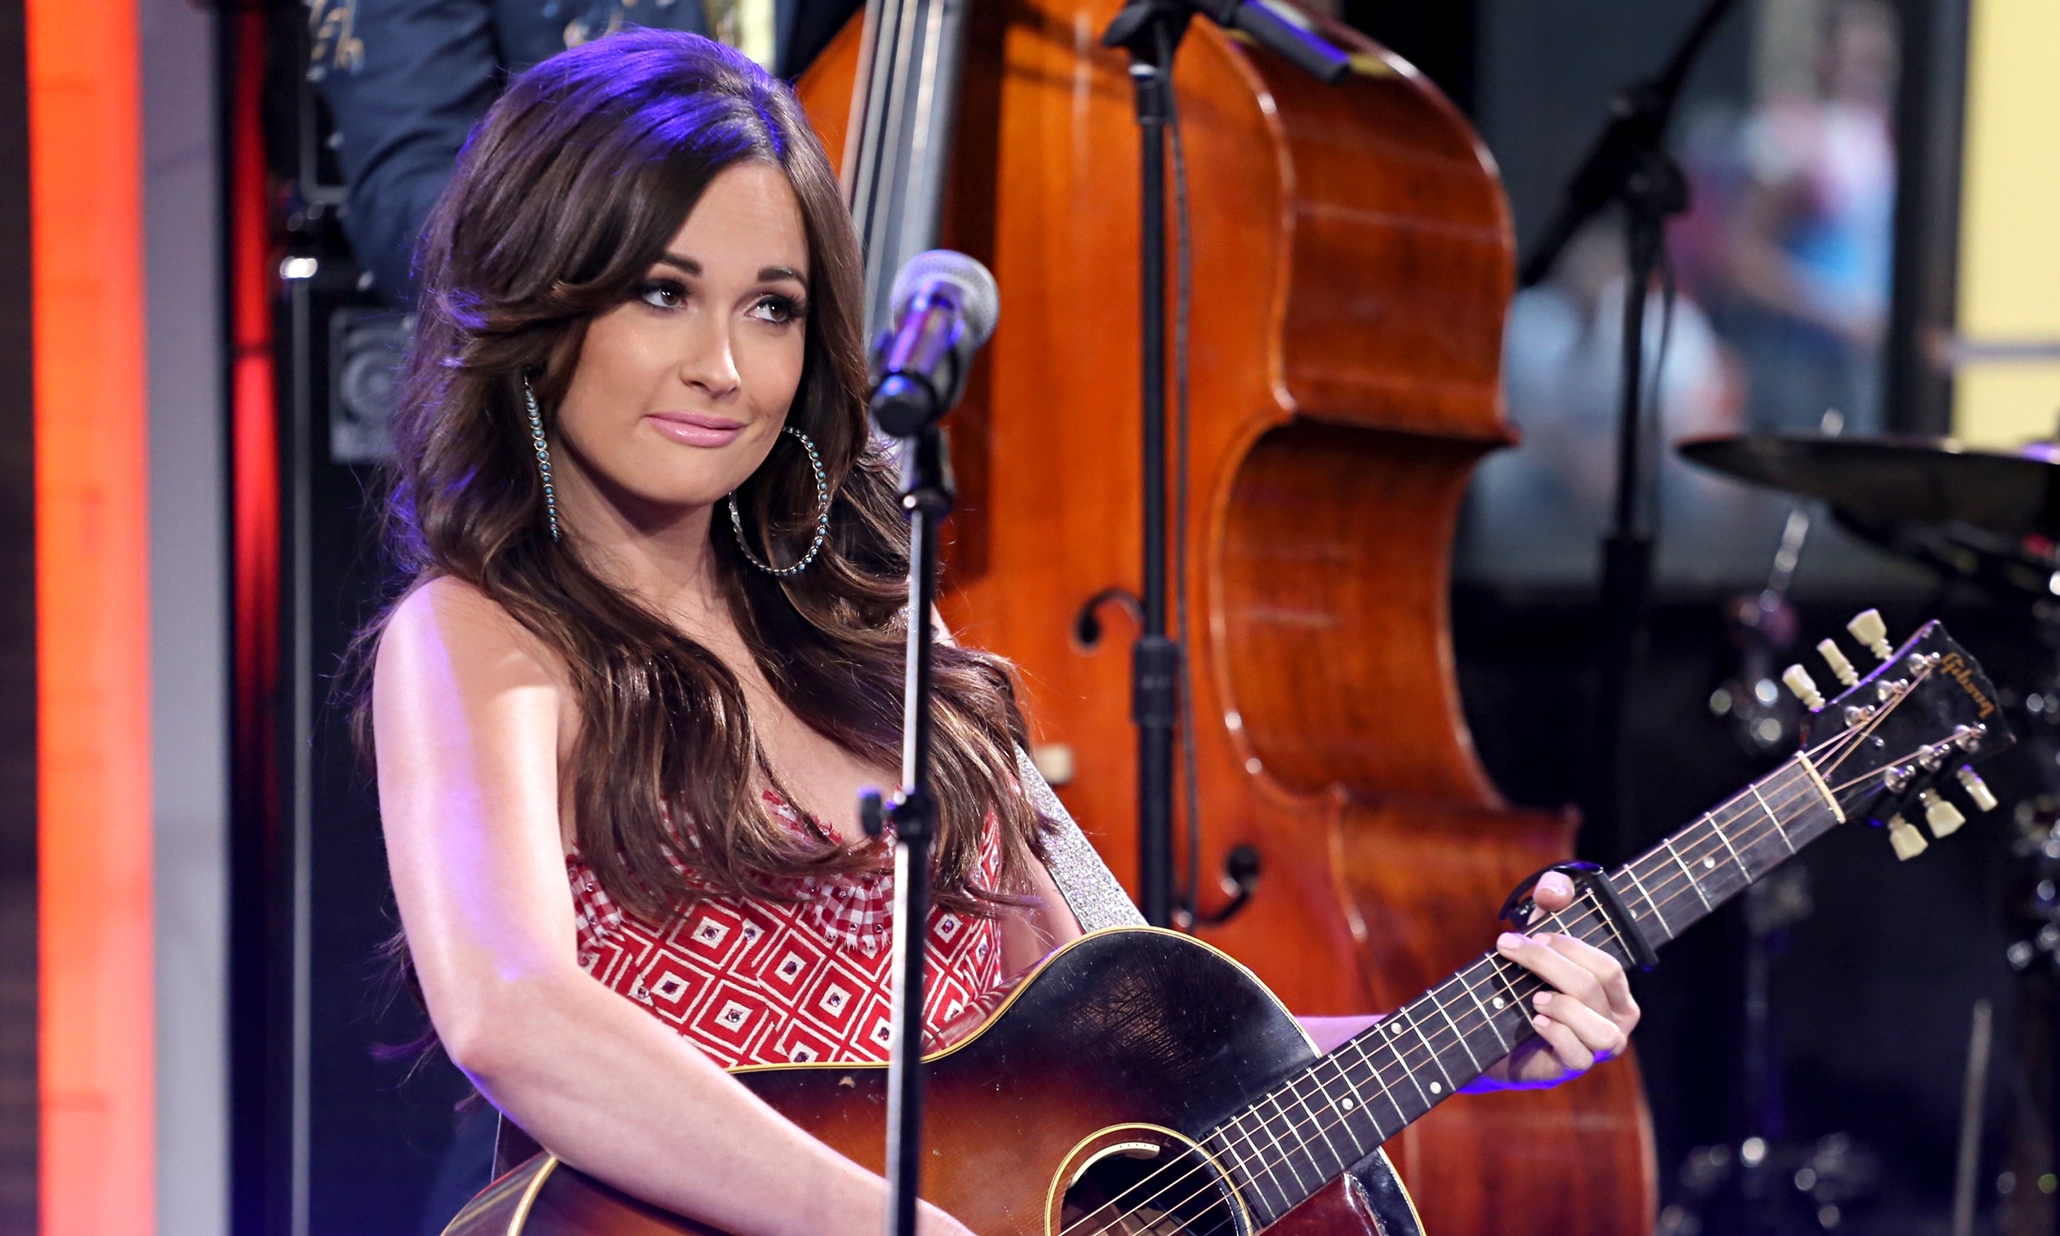 Kacey Musgraves: Pageant Material review - sweet tunes laced with wit - Mus...